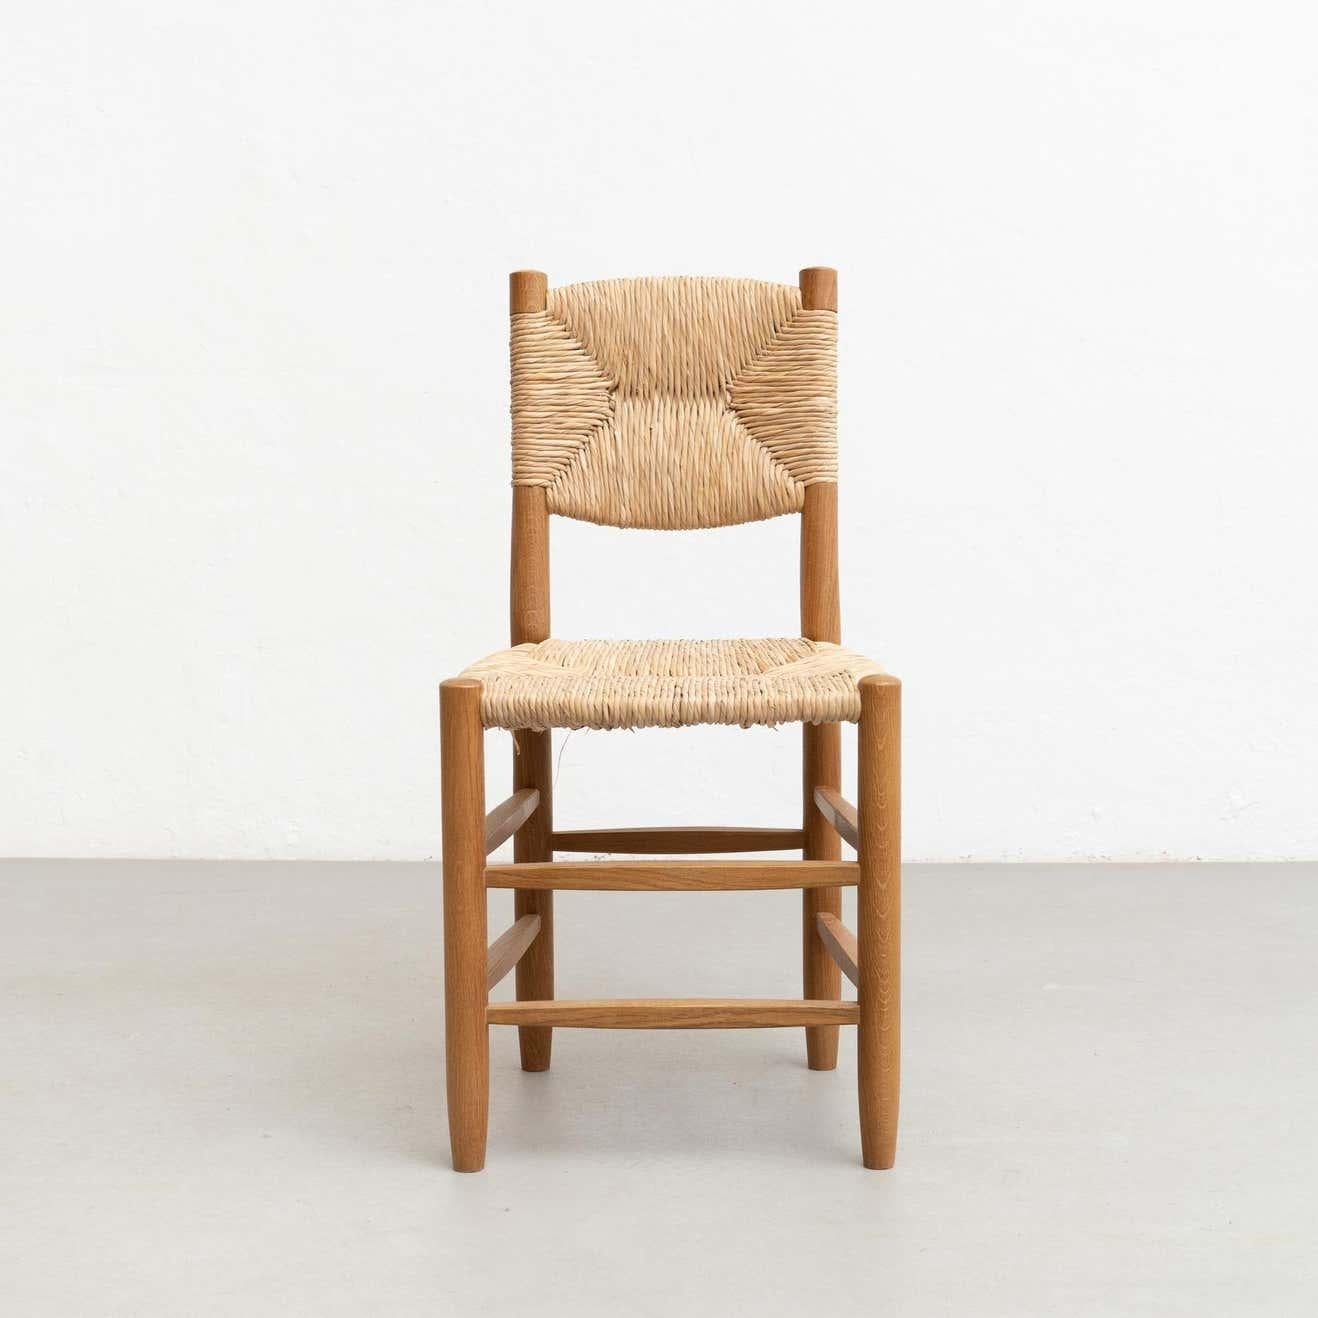 Set of Six After Charlotte Perriand N.19 Chairs, Wood Rattan, Mid-Century Modern For Sale 10